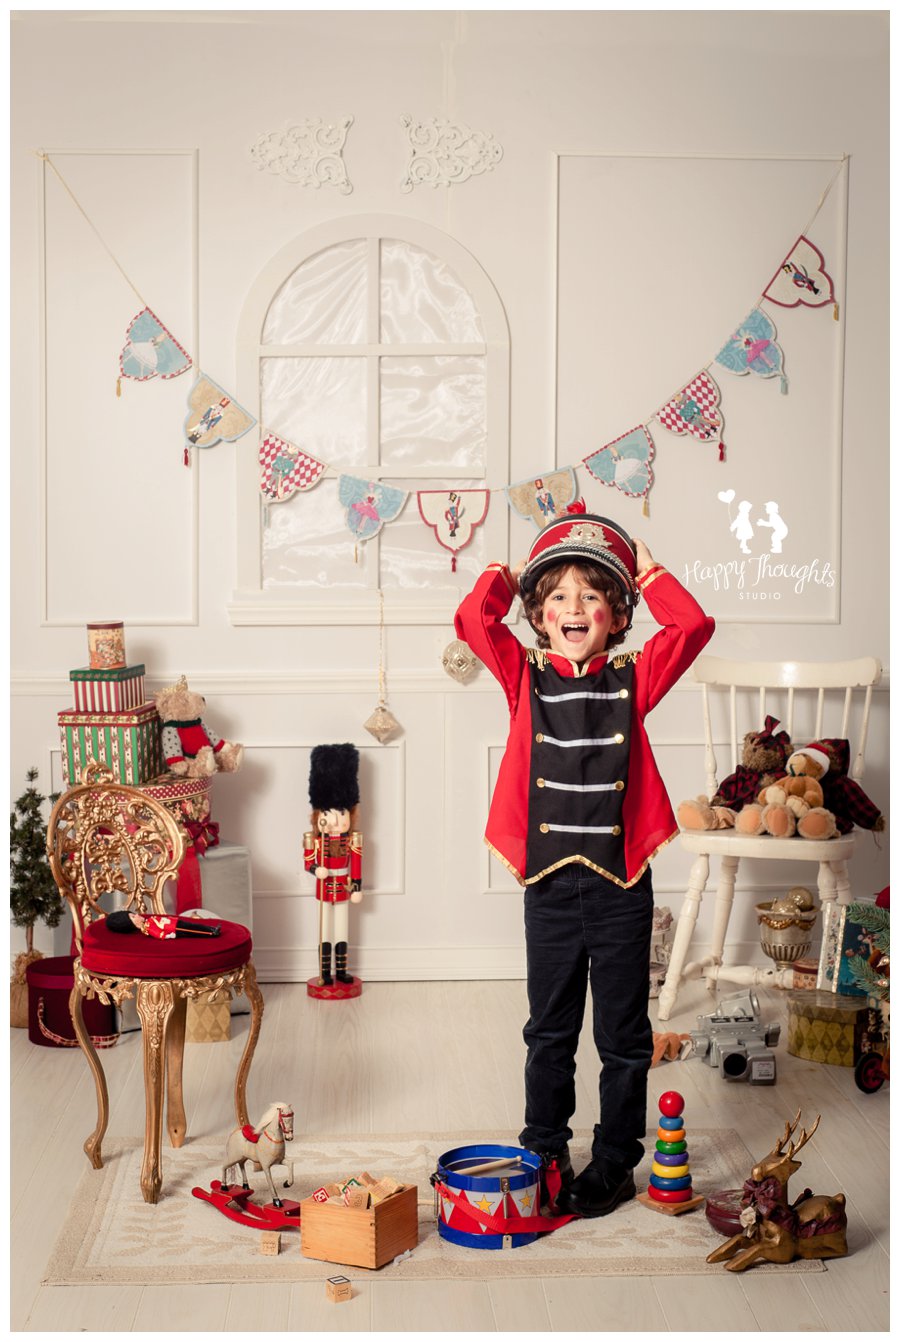 Babes in Toyland Christmas children photography